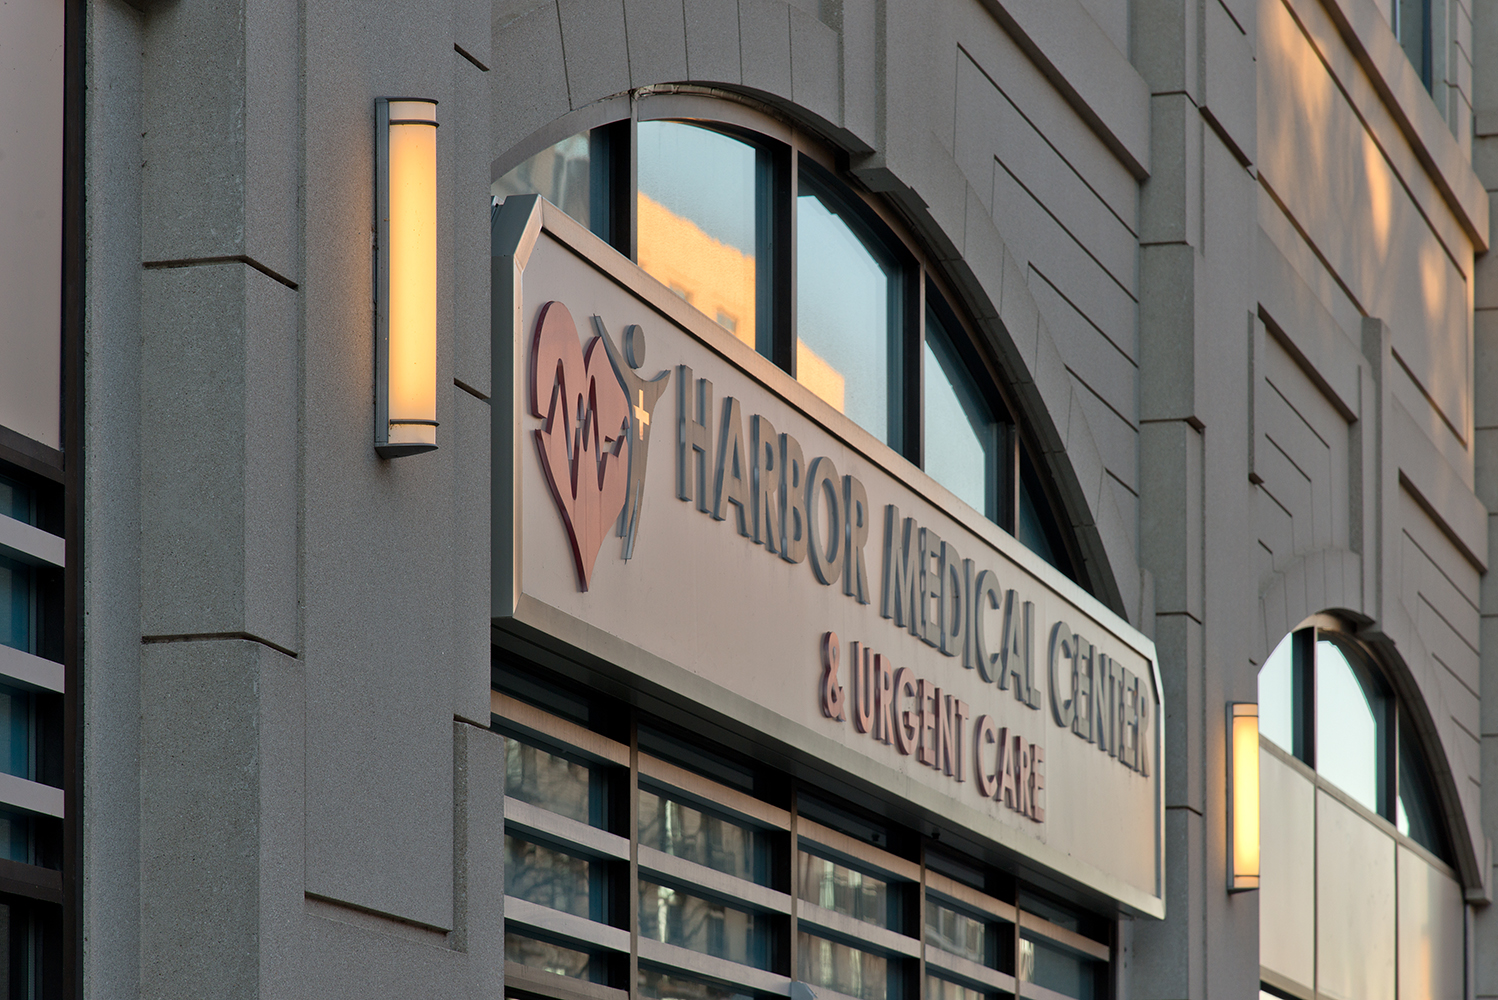 Raven outdoor light fixtures along a large medical center sign, mounted vertically.